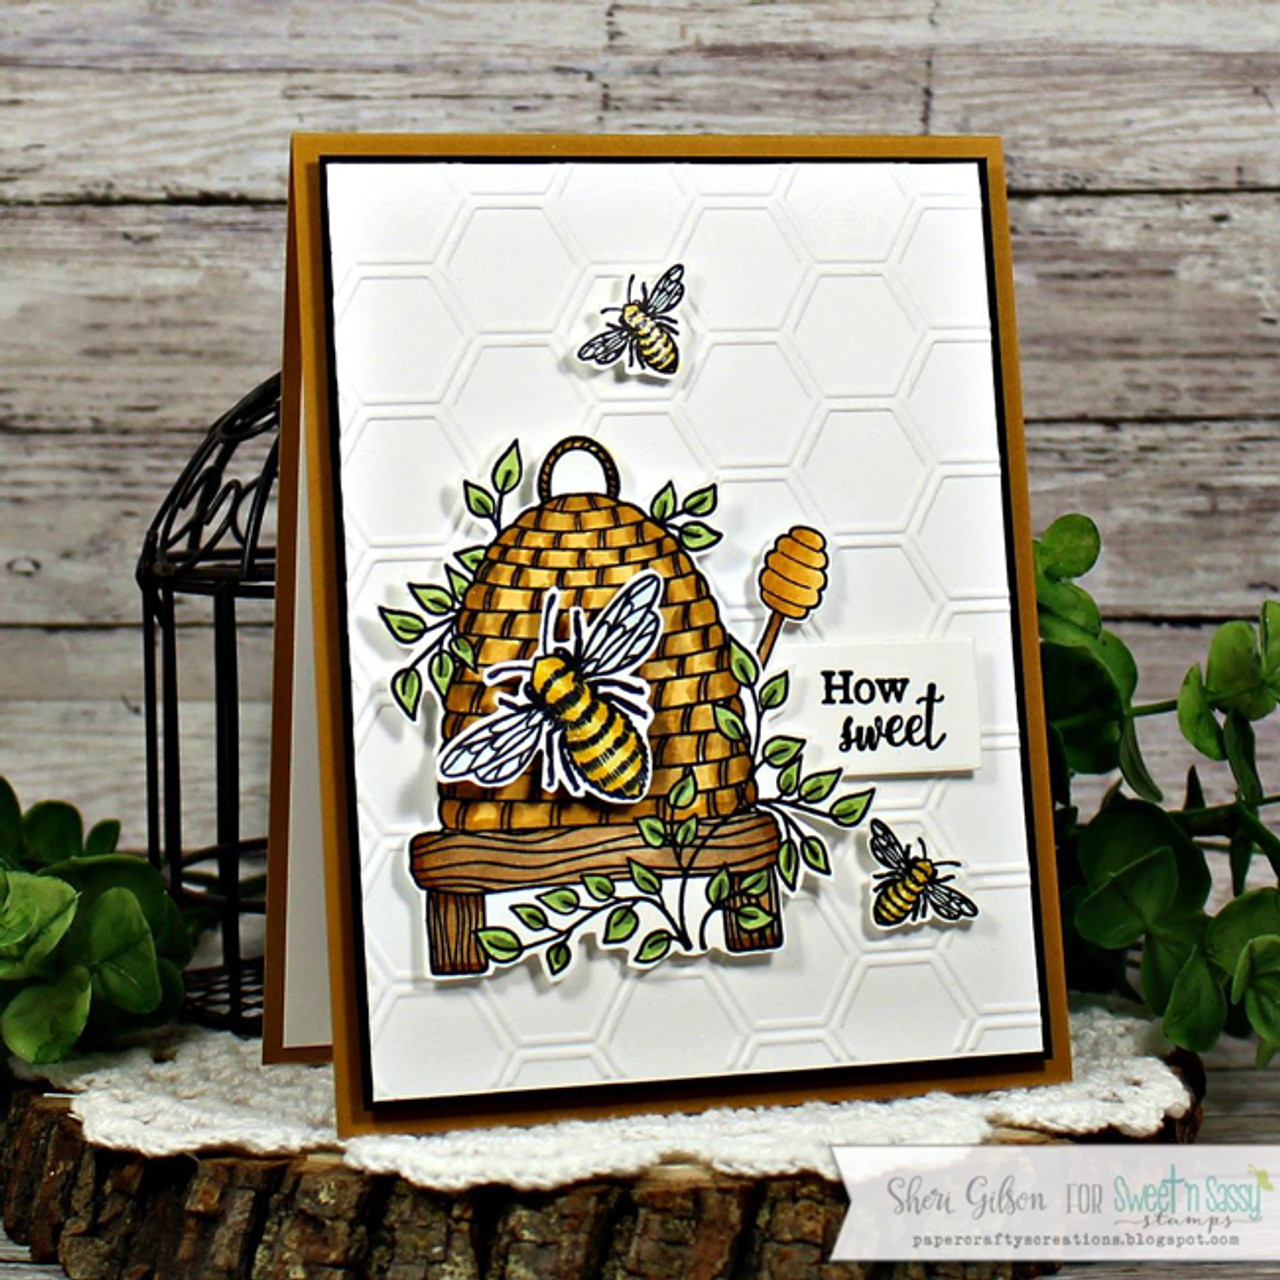 Honey Bee Stamps Sweet Honey Bee Stamp Set – The Ink Stand